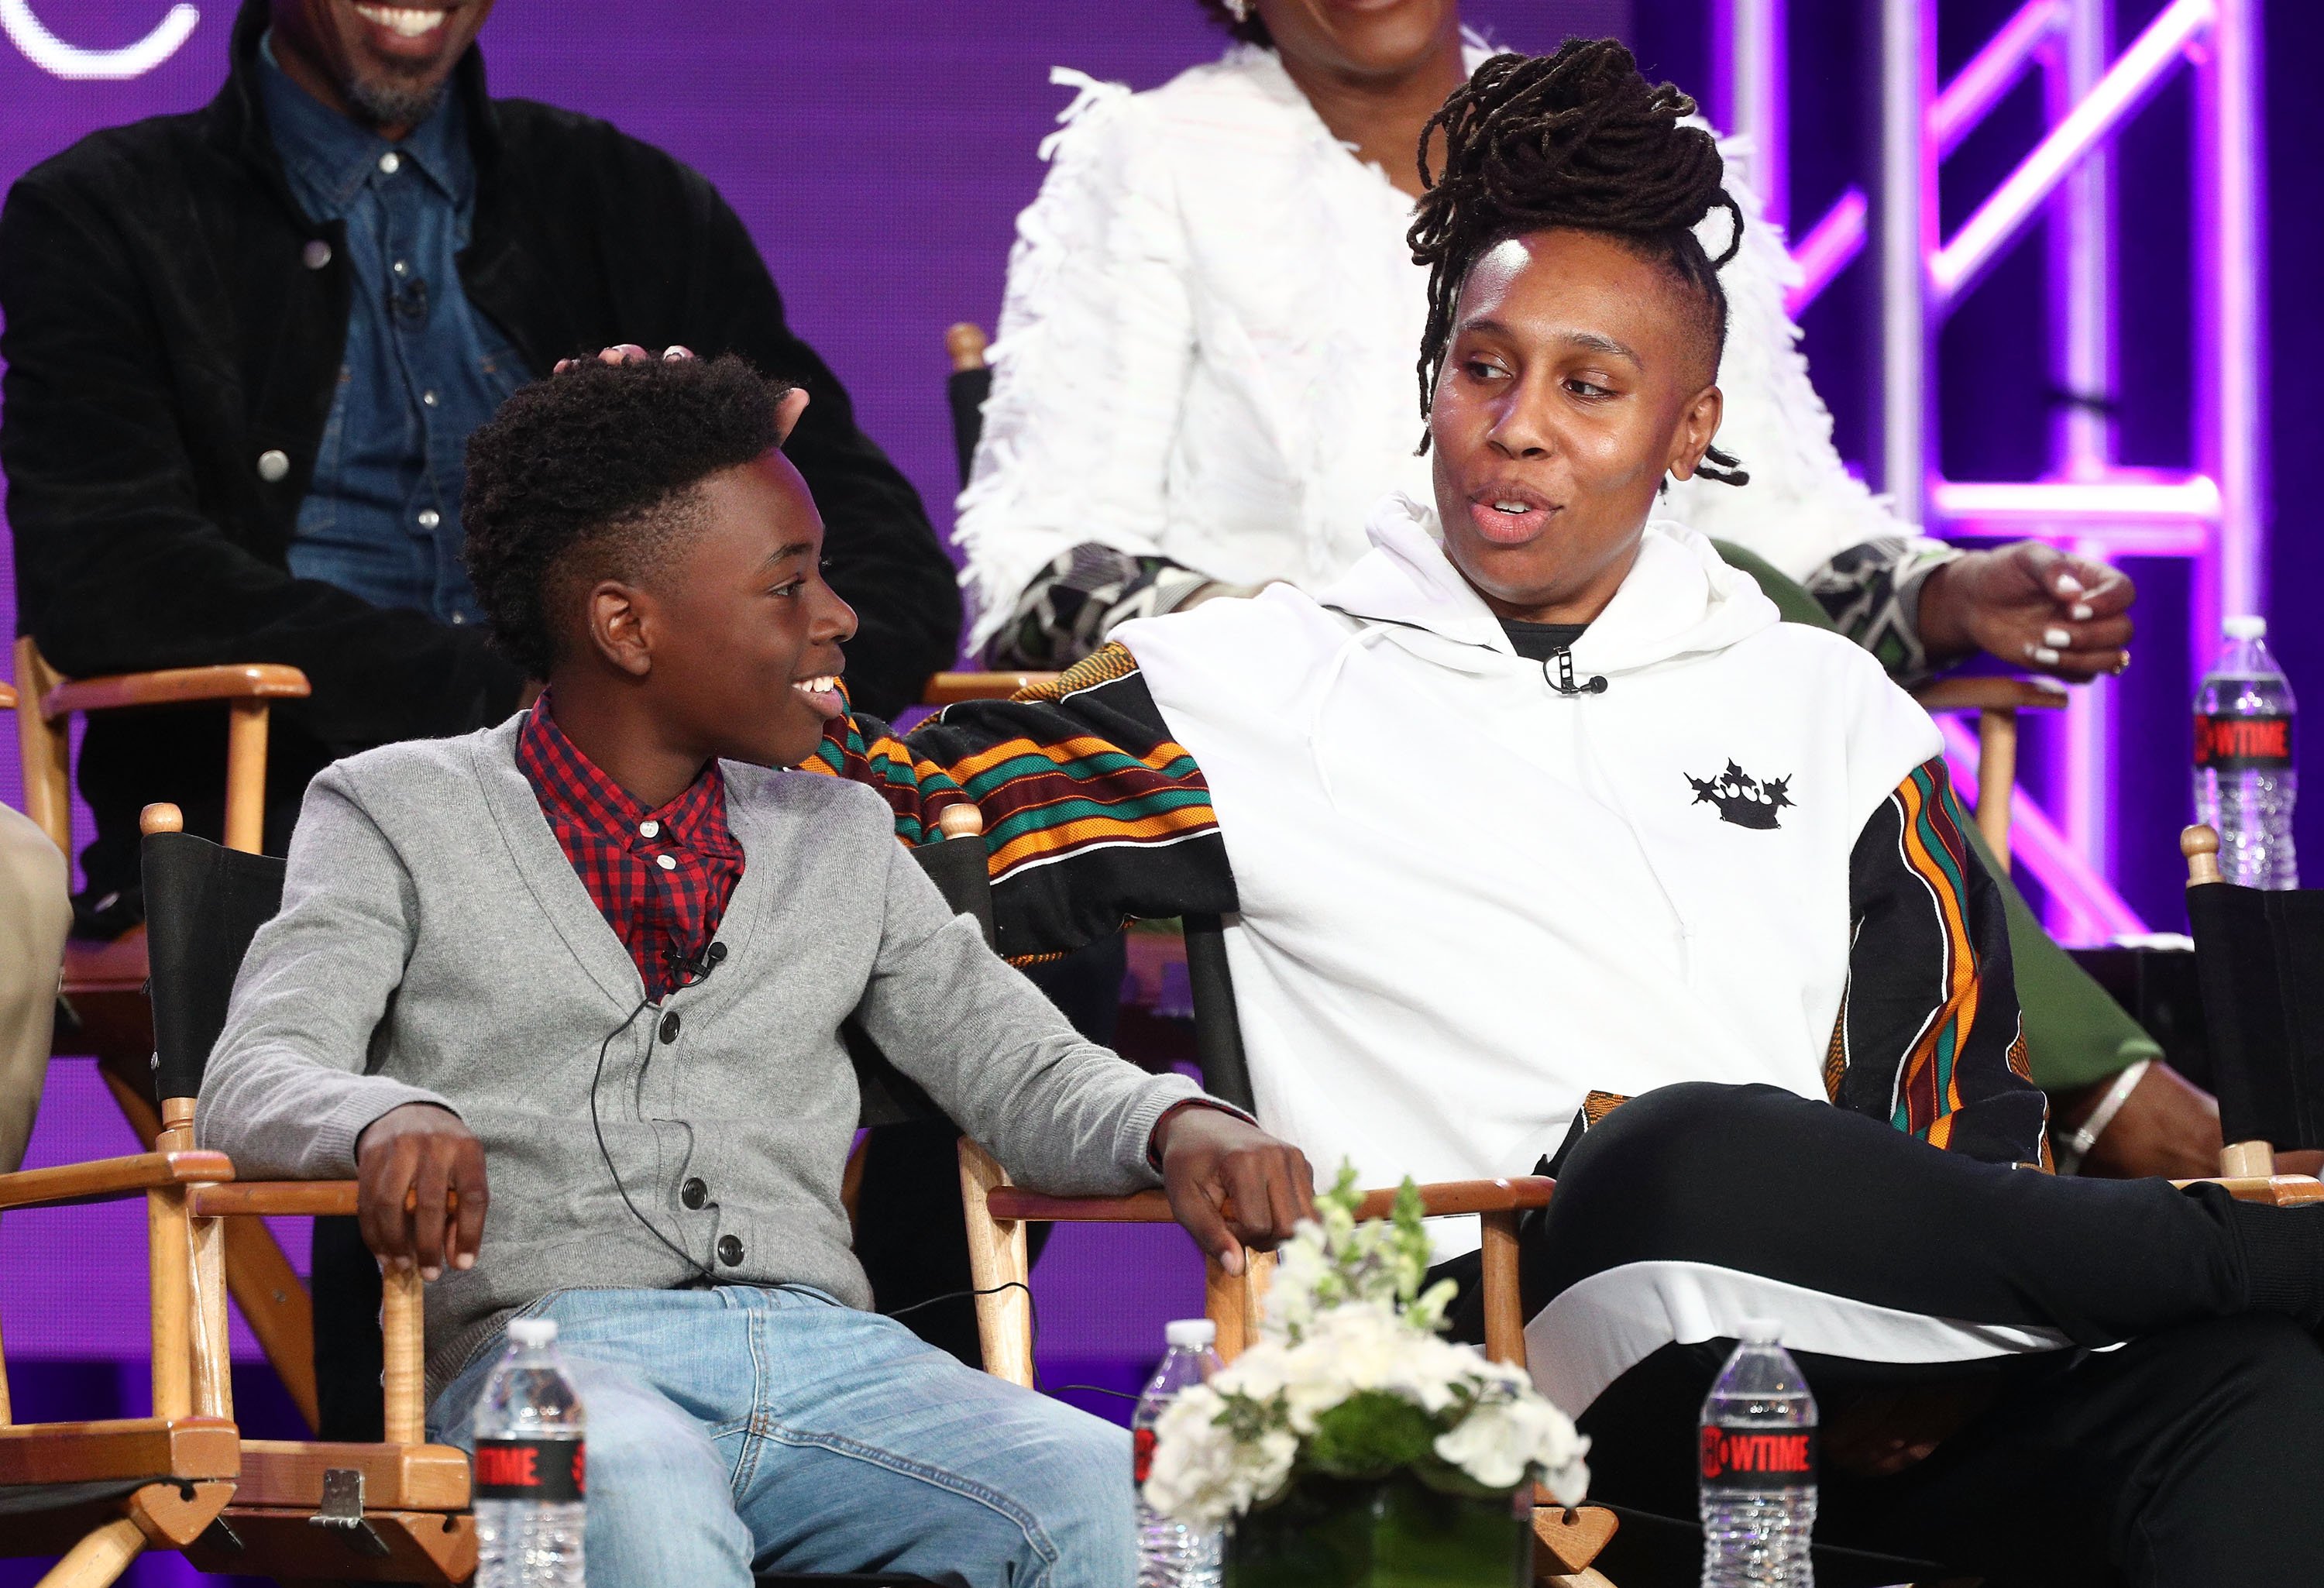 Alex Hibbert (L) and creator/executive producer and writer Lena Waithe of the television show 'The Chi' speak onstage during the CBS Showtime portion of the 2018 Winter Television Critics Association Press Tour